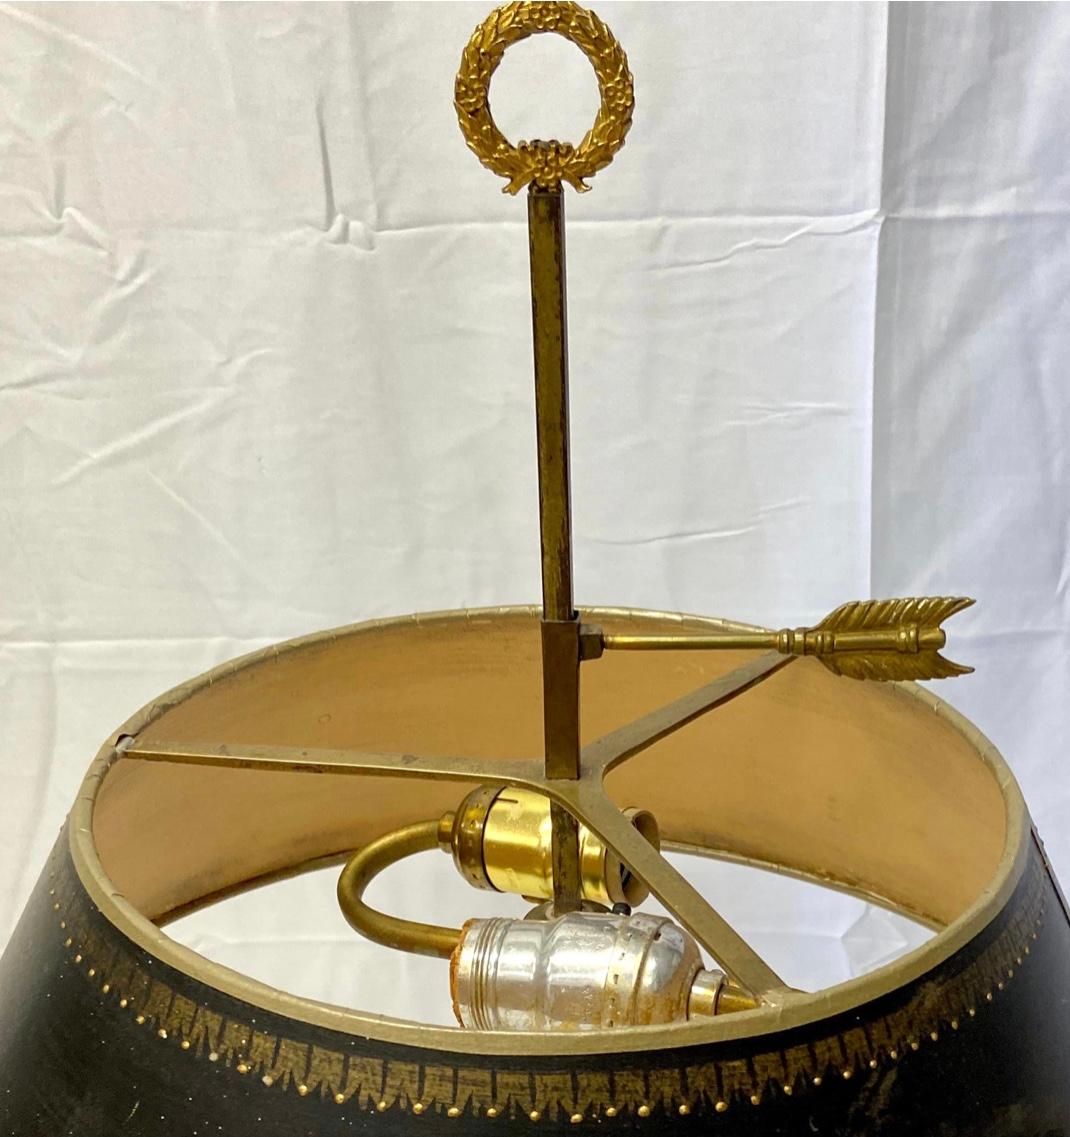 Beautiful French bronze Bouillote lamp with black matte and gold trim shade. Lamp features two light sockets and two candles brackets. Very good condition appropriate to age.